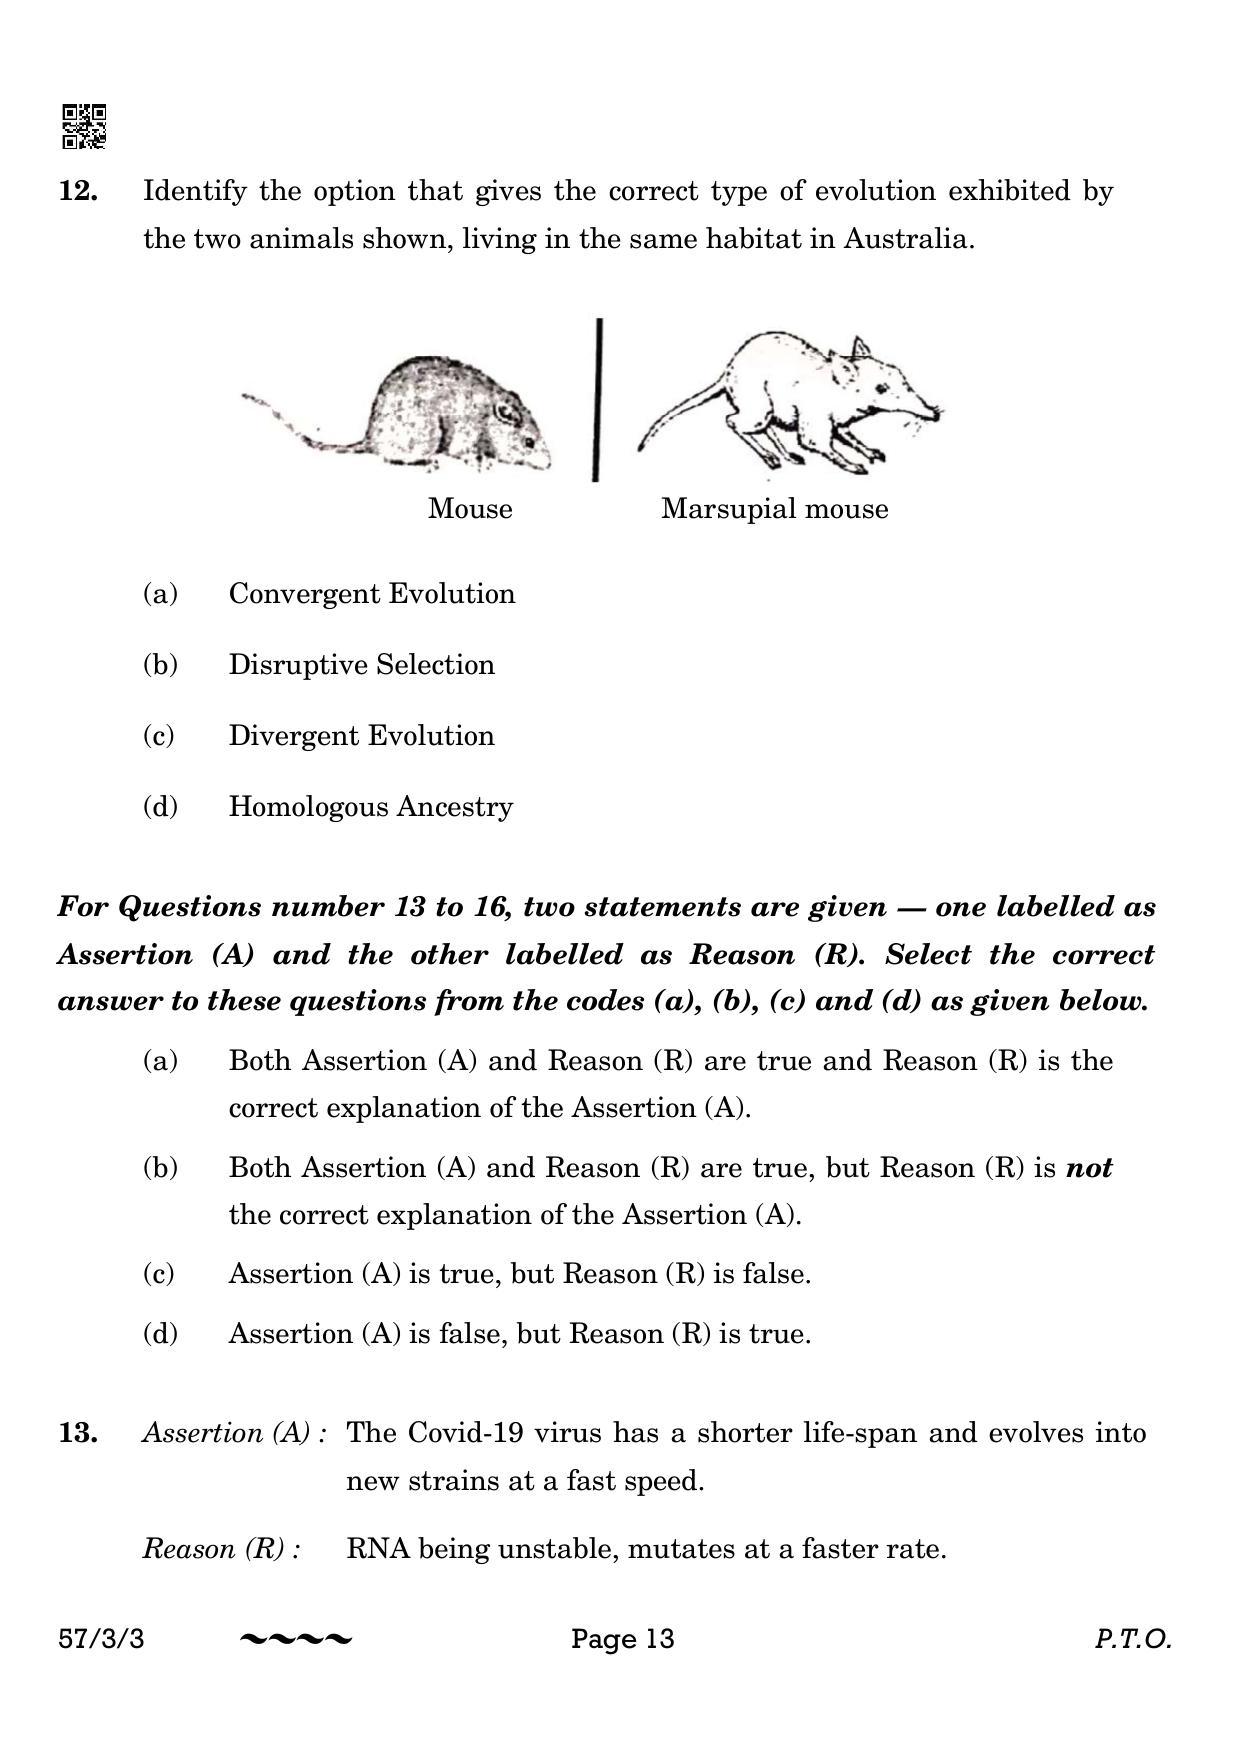 CBSE Class 12 57-3-3 Biology 2023 Question Paper - Page 13